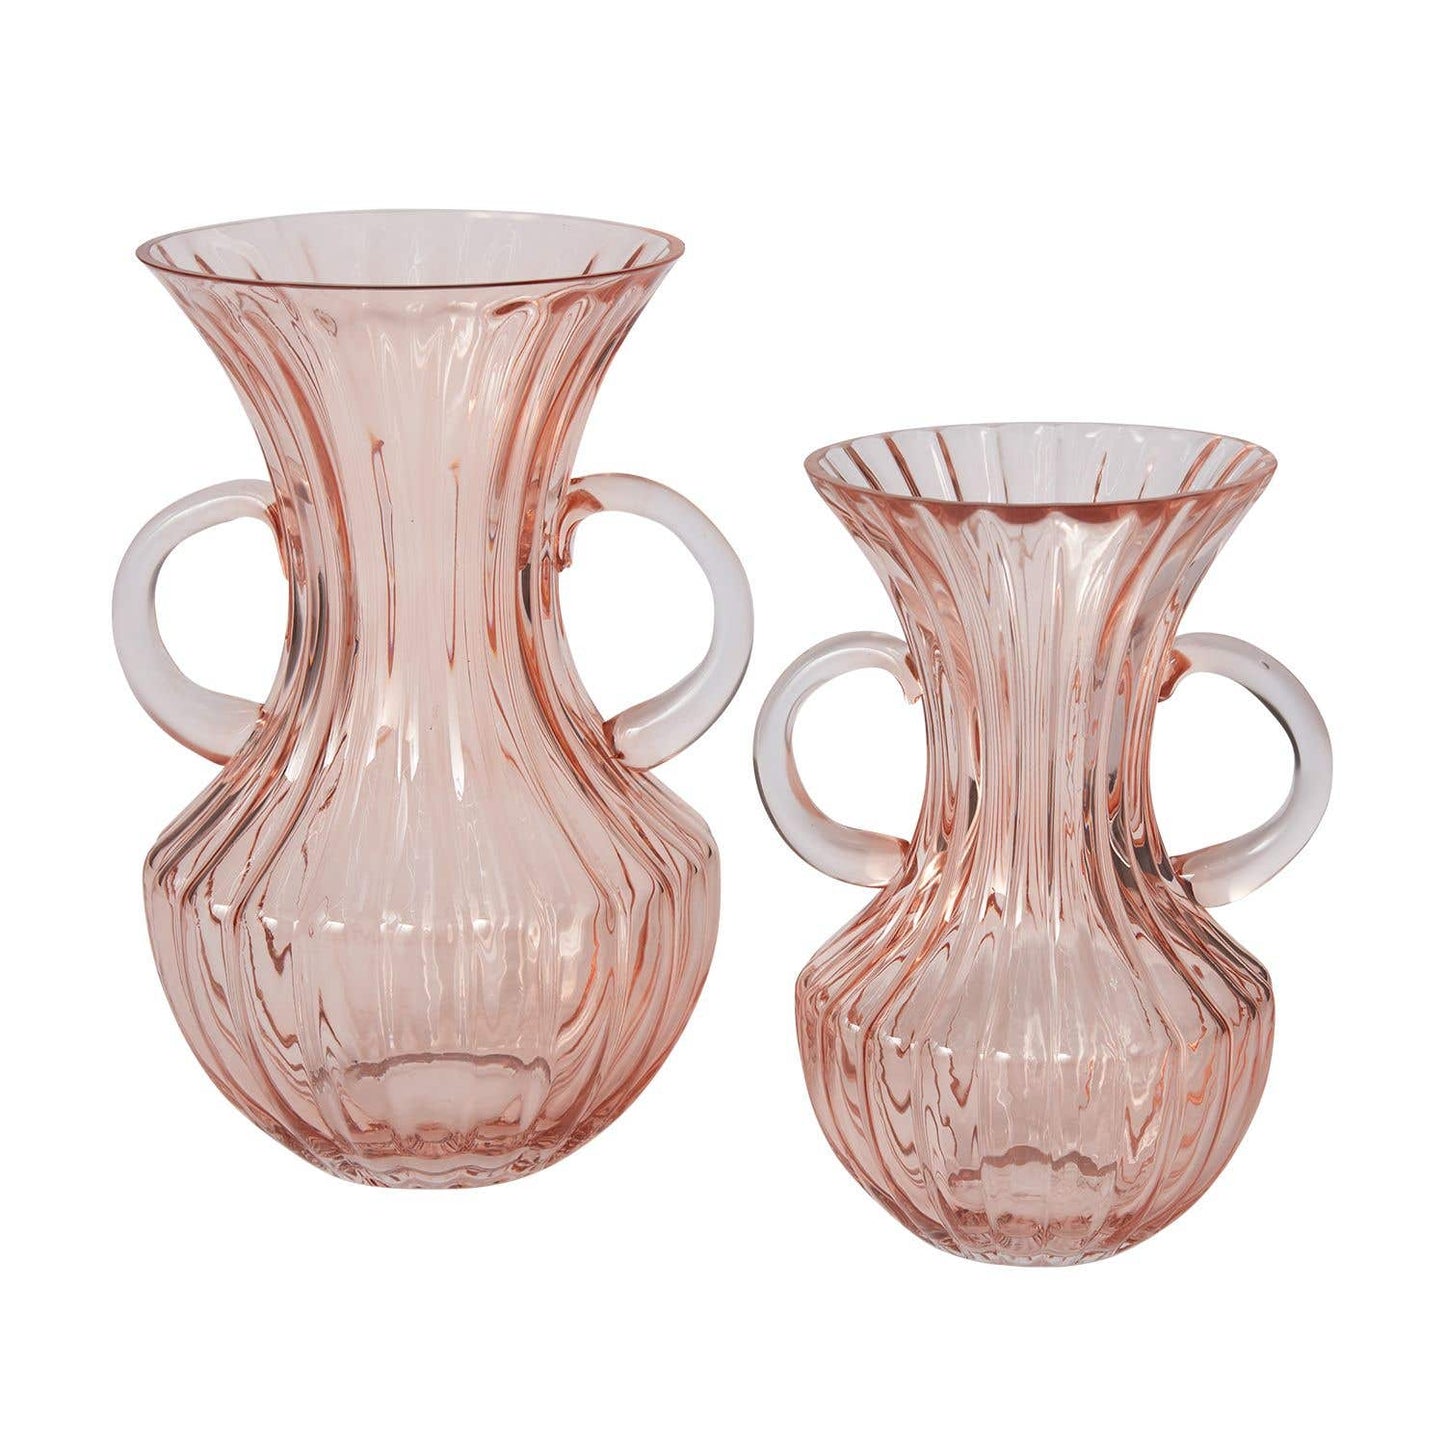 mouth blown, with vertical ridges and a flared opening. Two curved handles show off an hourglass silhouette of this rosy hued container